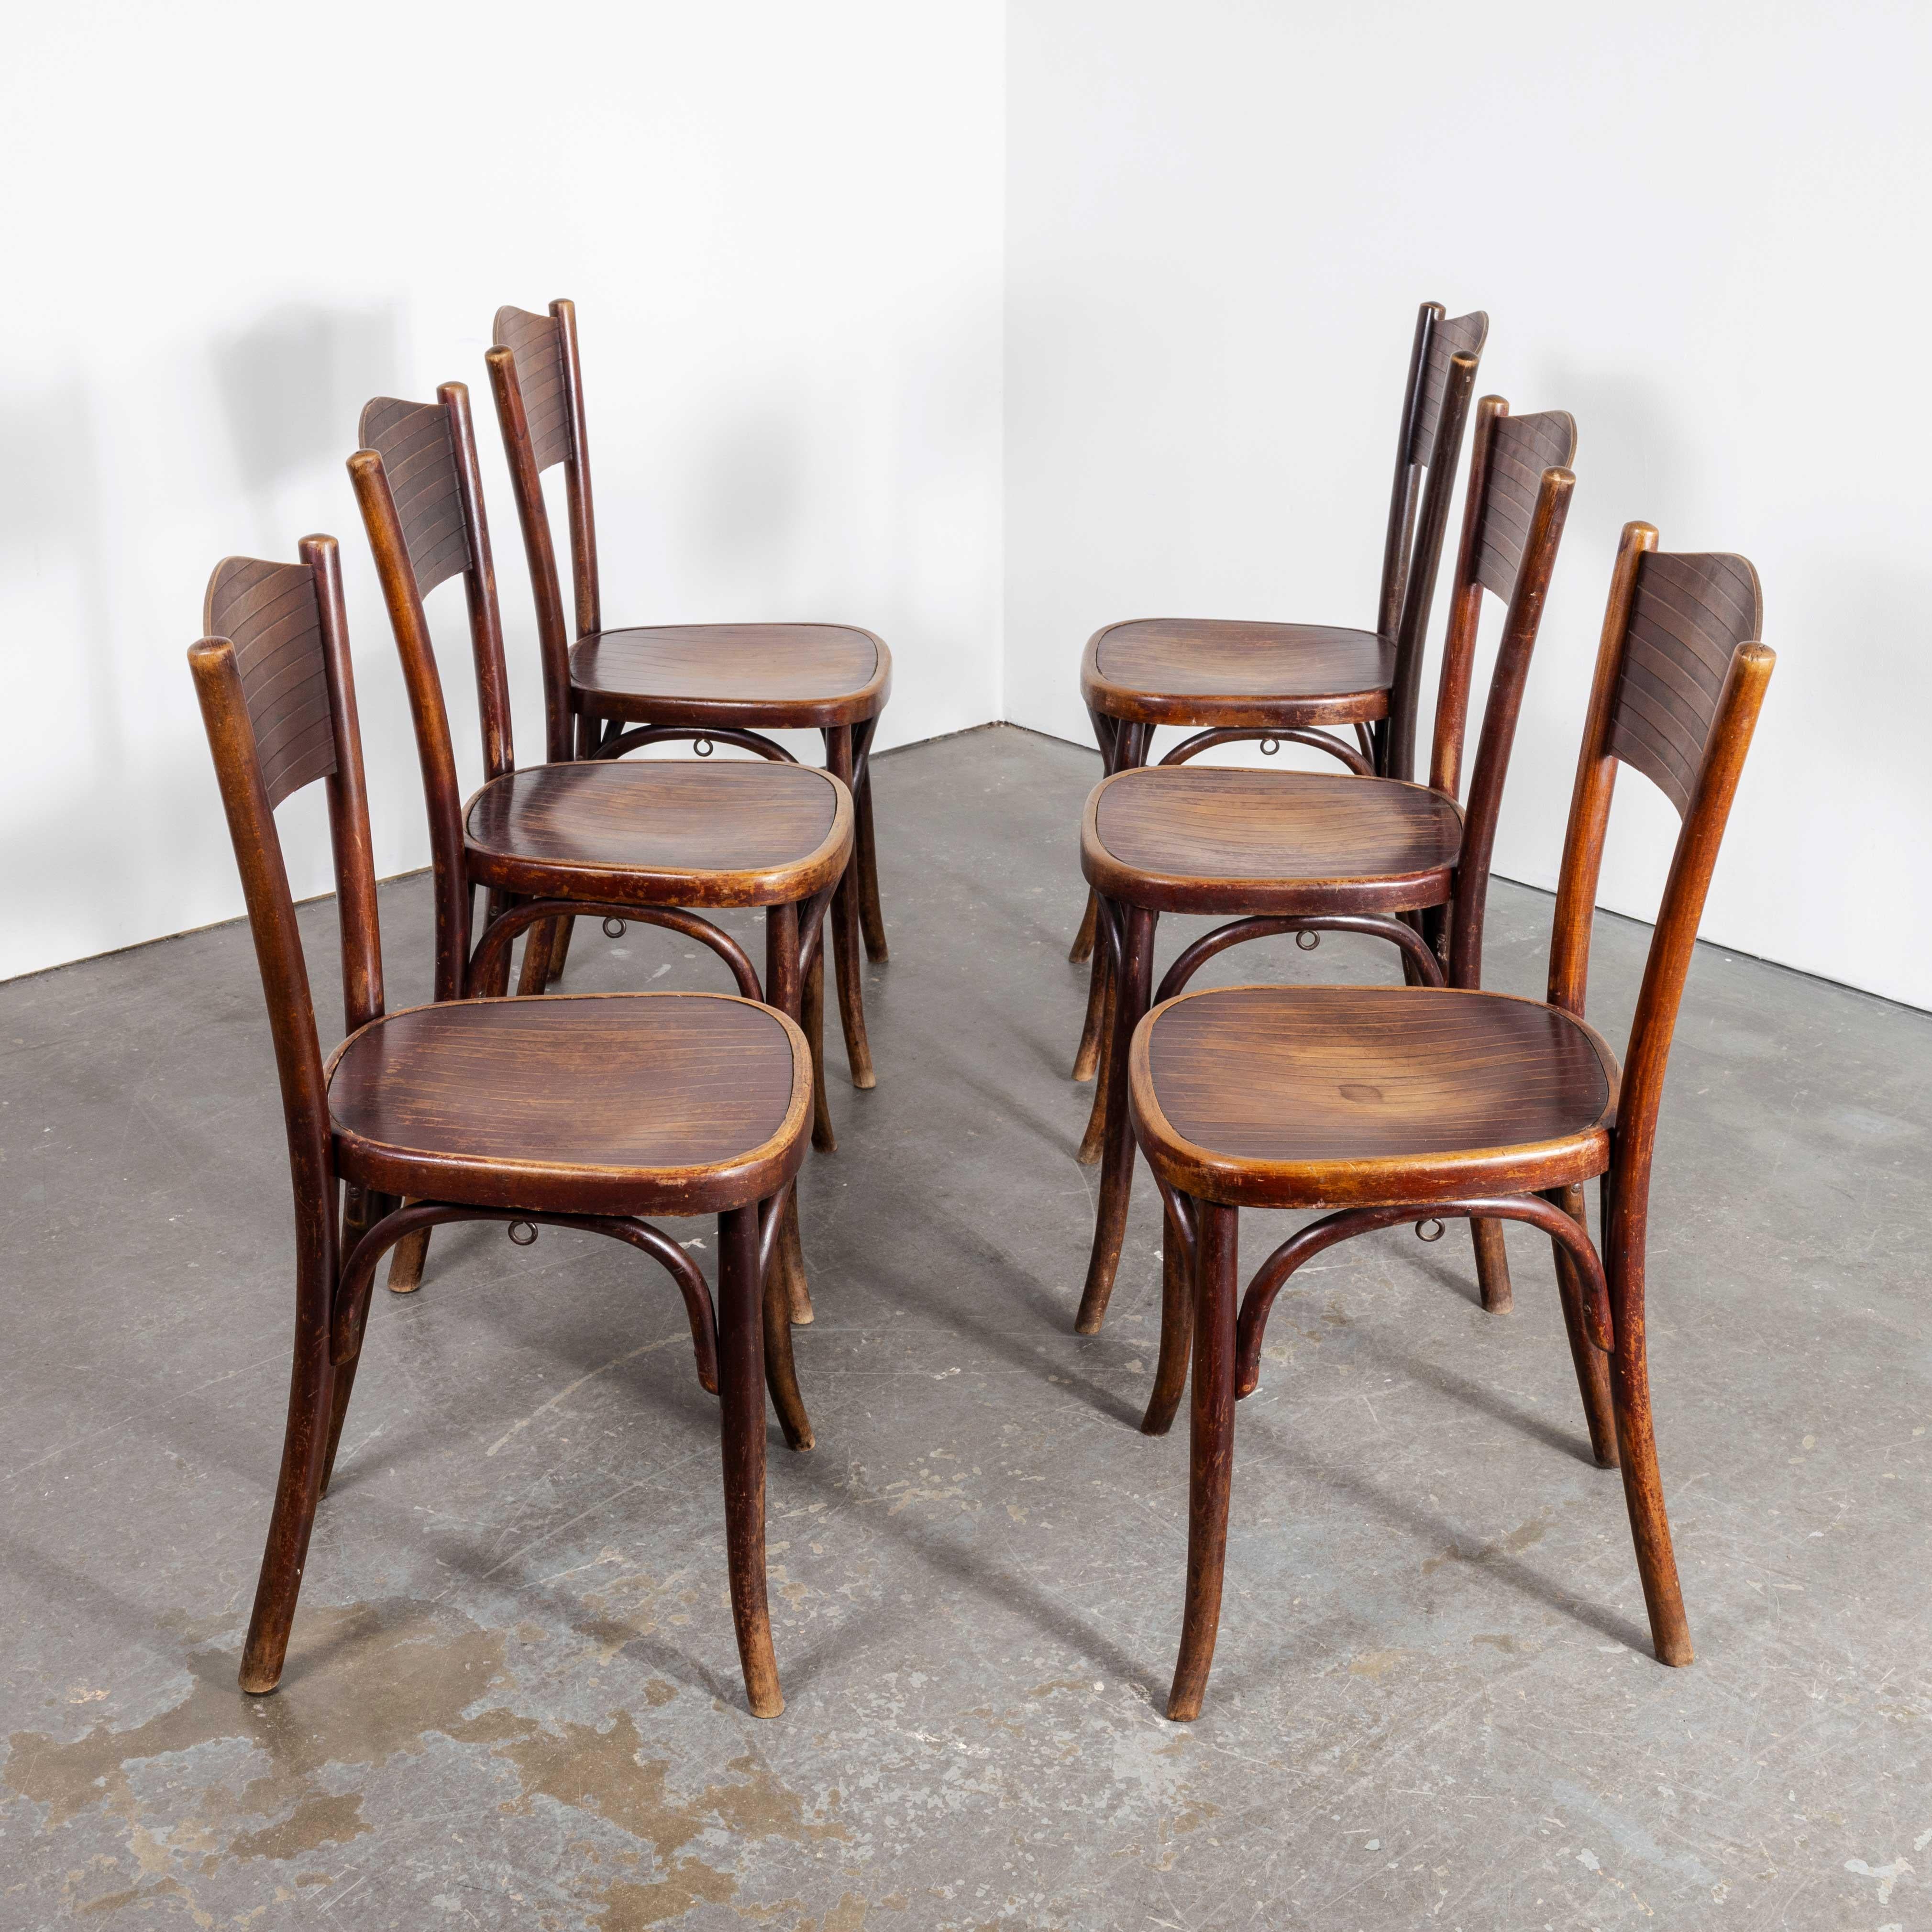 Mid-20th Century 1940's Fischel Stamped Bentwood Dining Chairs - Good Quantity Available For Sale